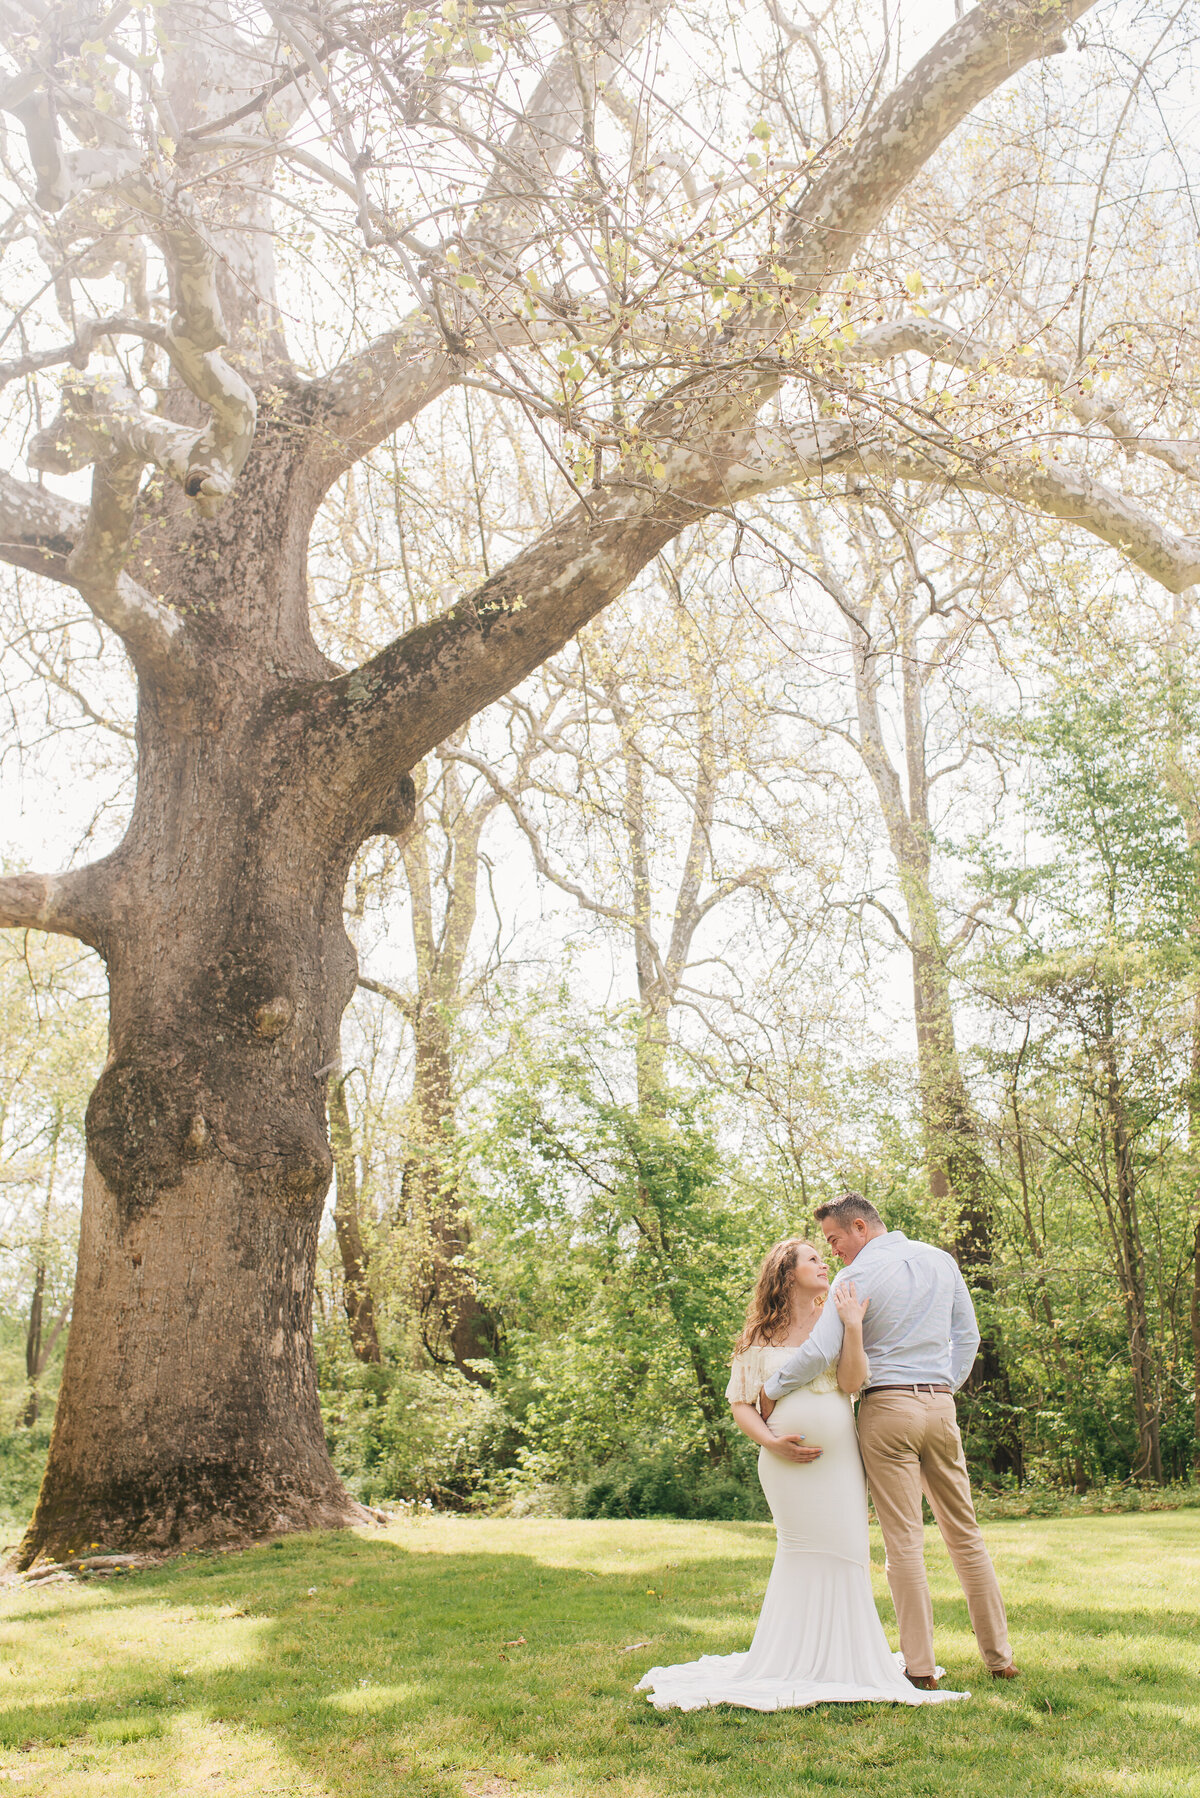 Expecting mother and father looking at each other in front of large tree